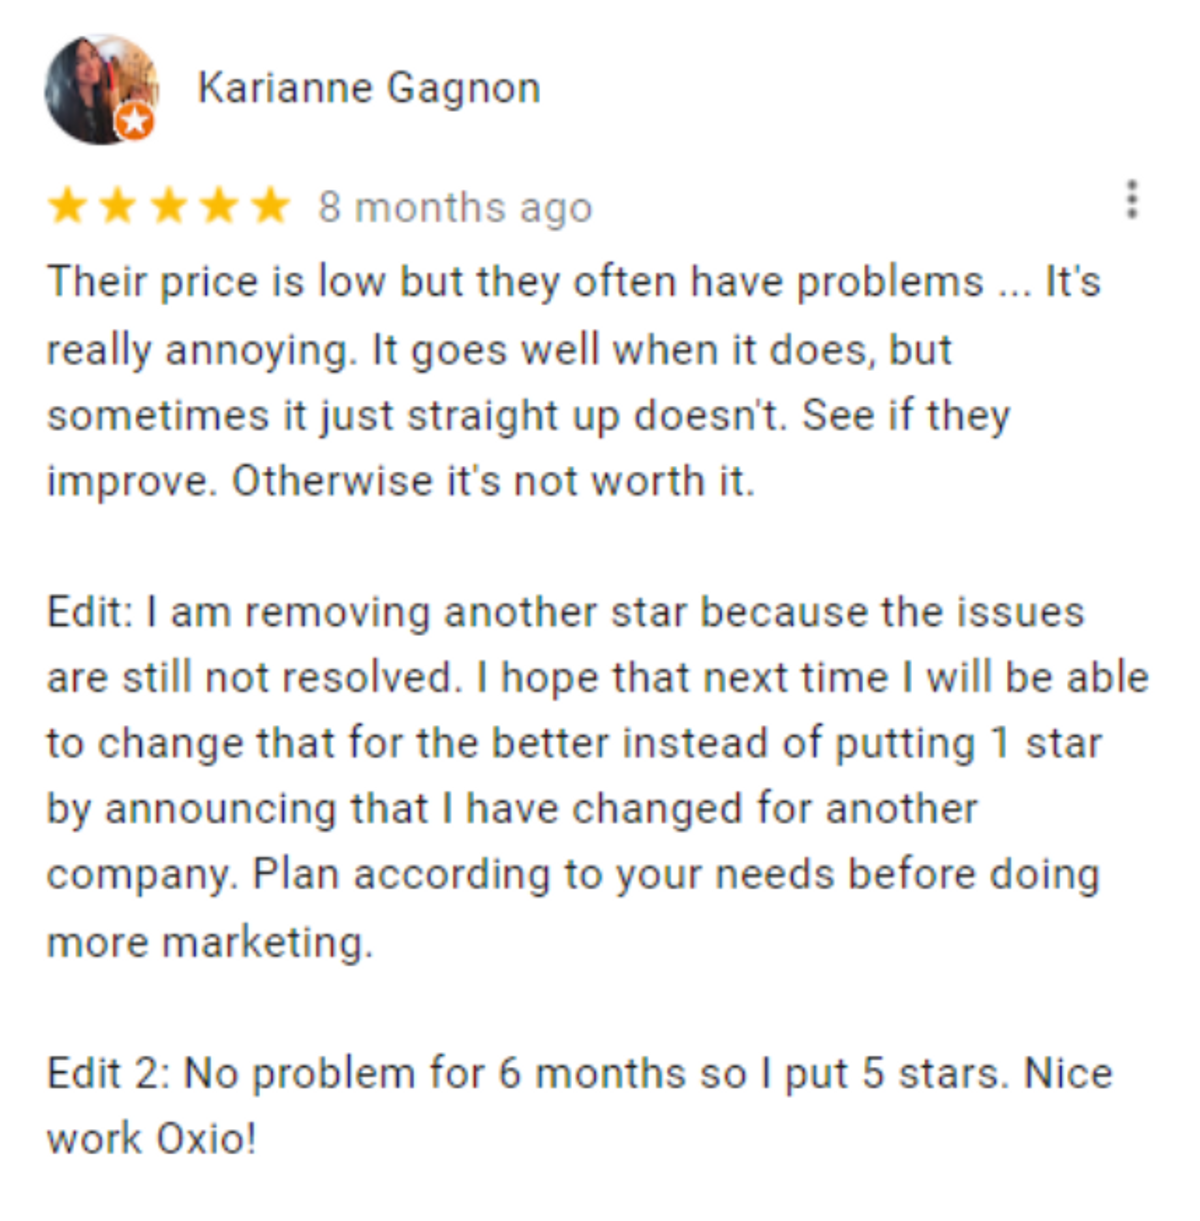 Screenshot of a review by Karianne Gagnon